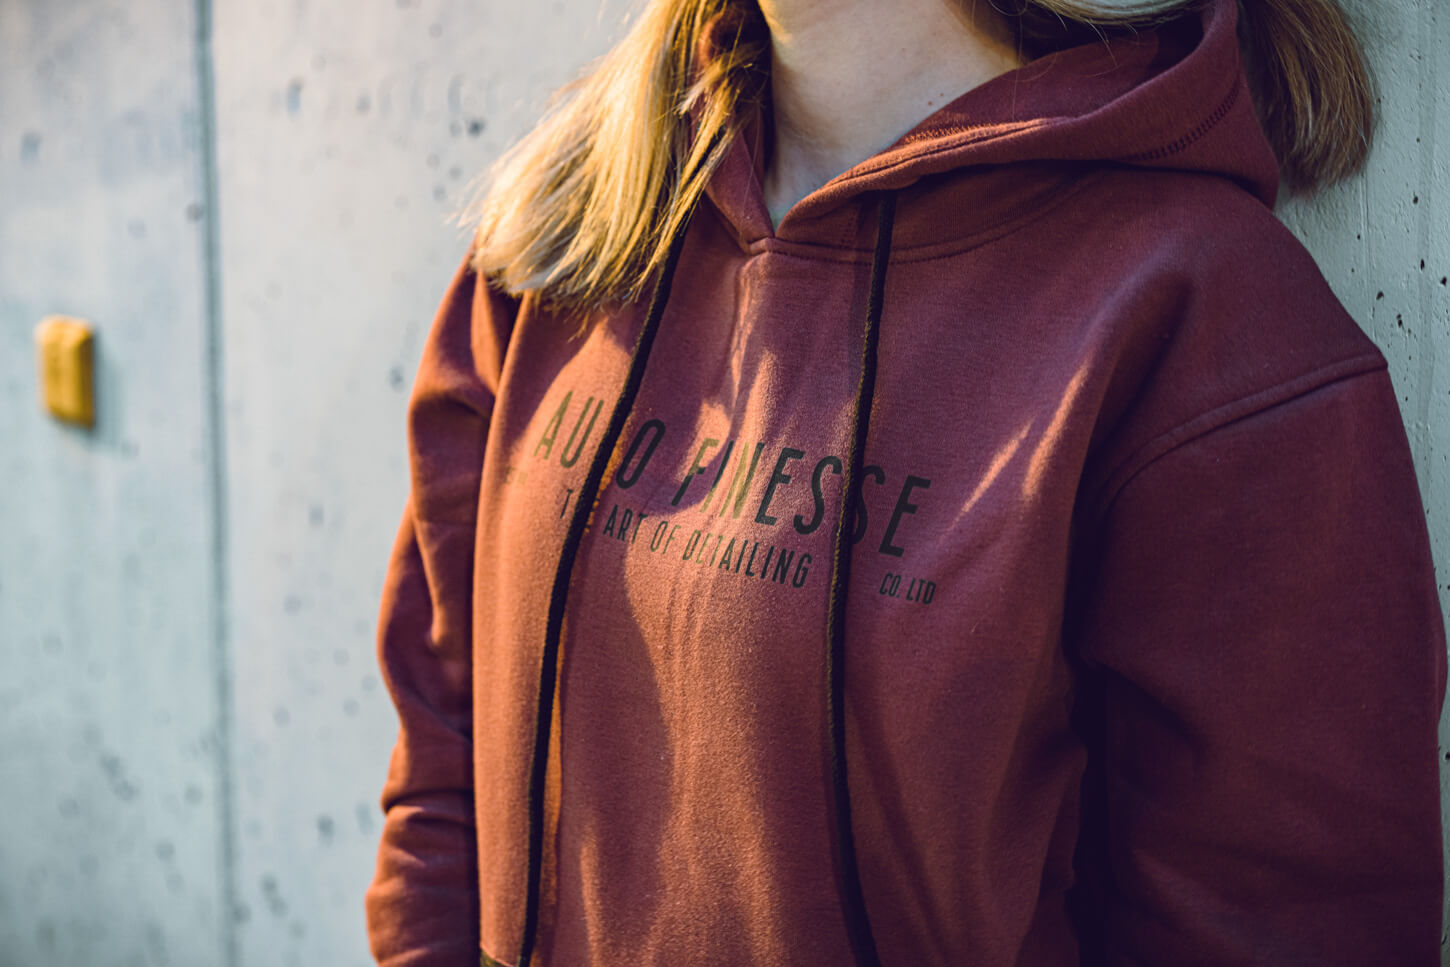 Auto Finesse The MK2 Essentials Hoodie - Red Small